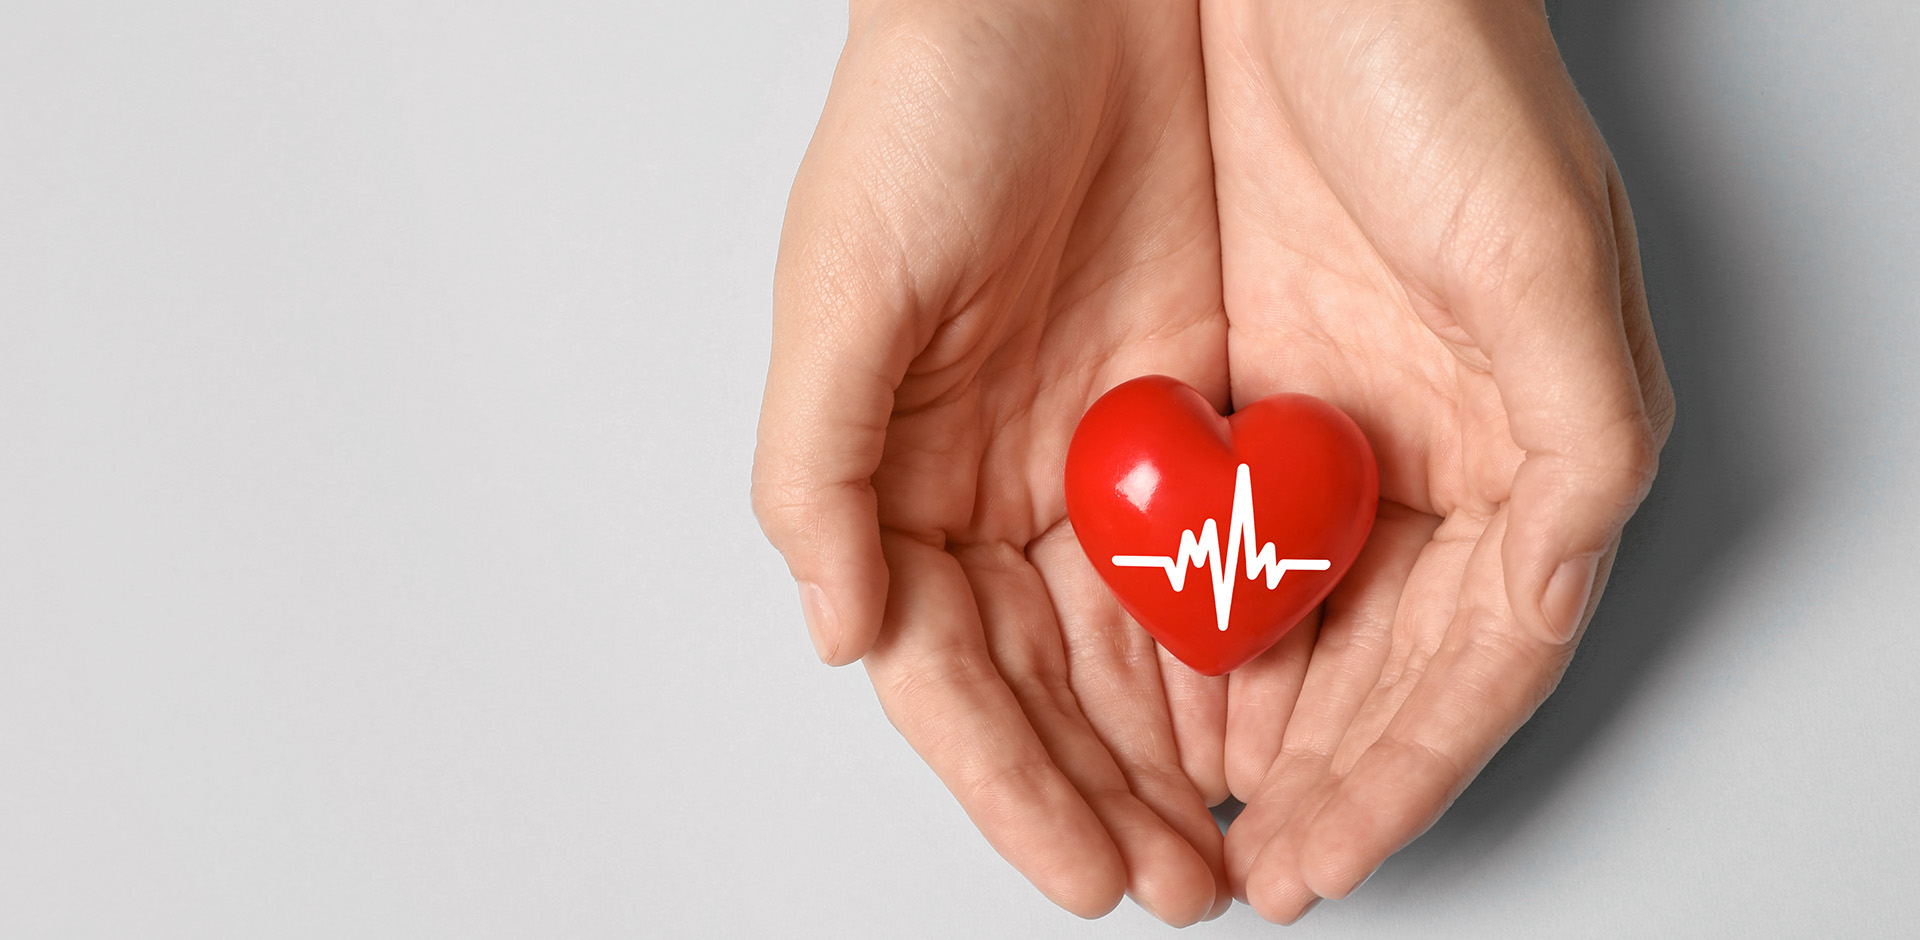 The hands holding a heart showing a pulse line.